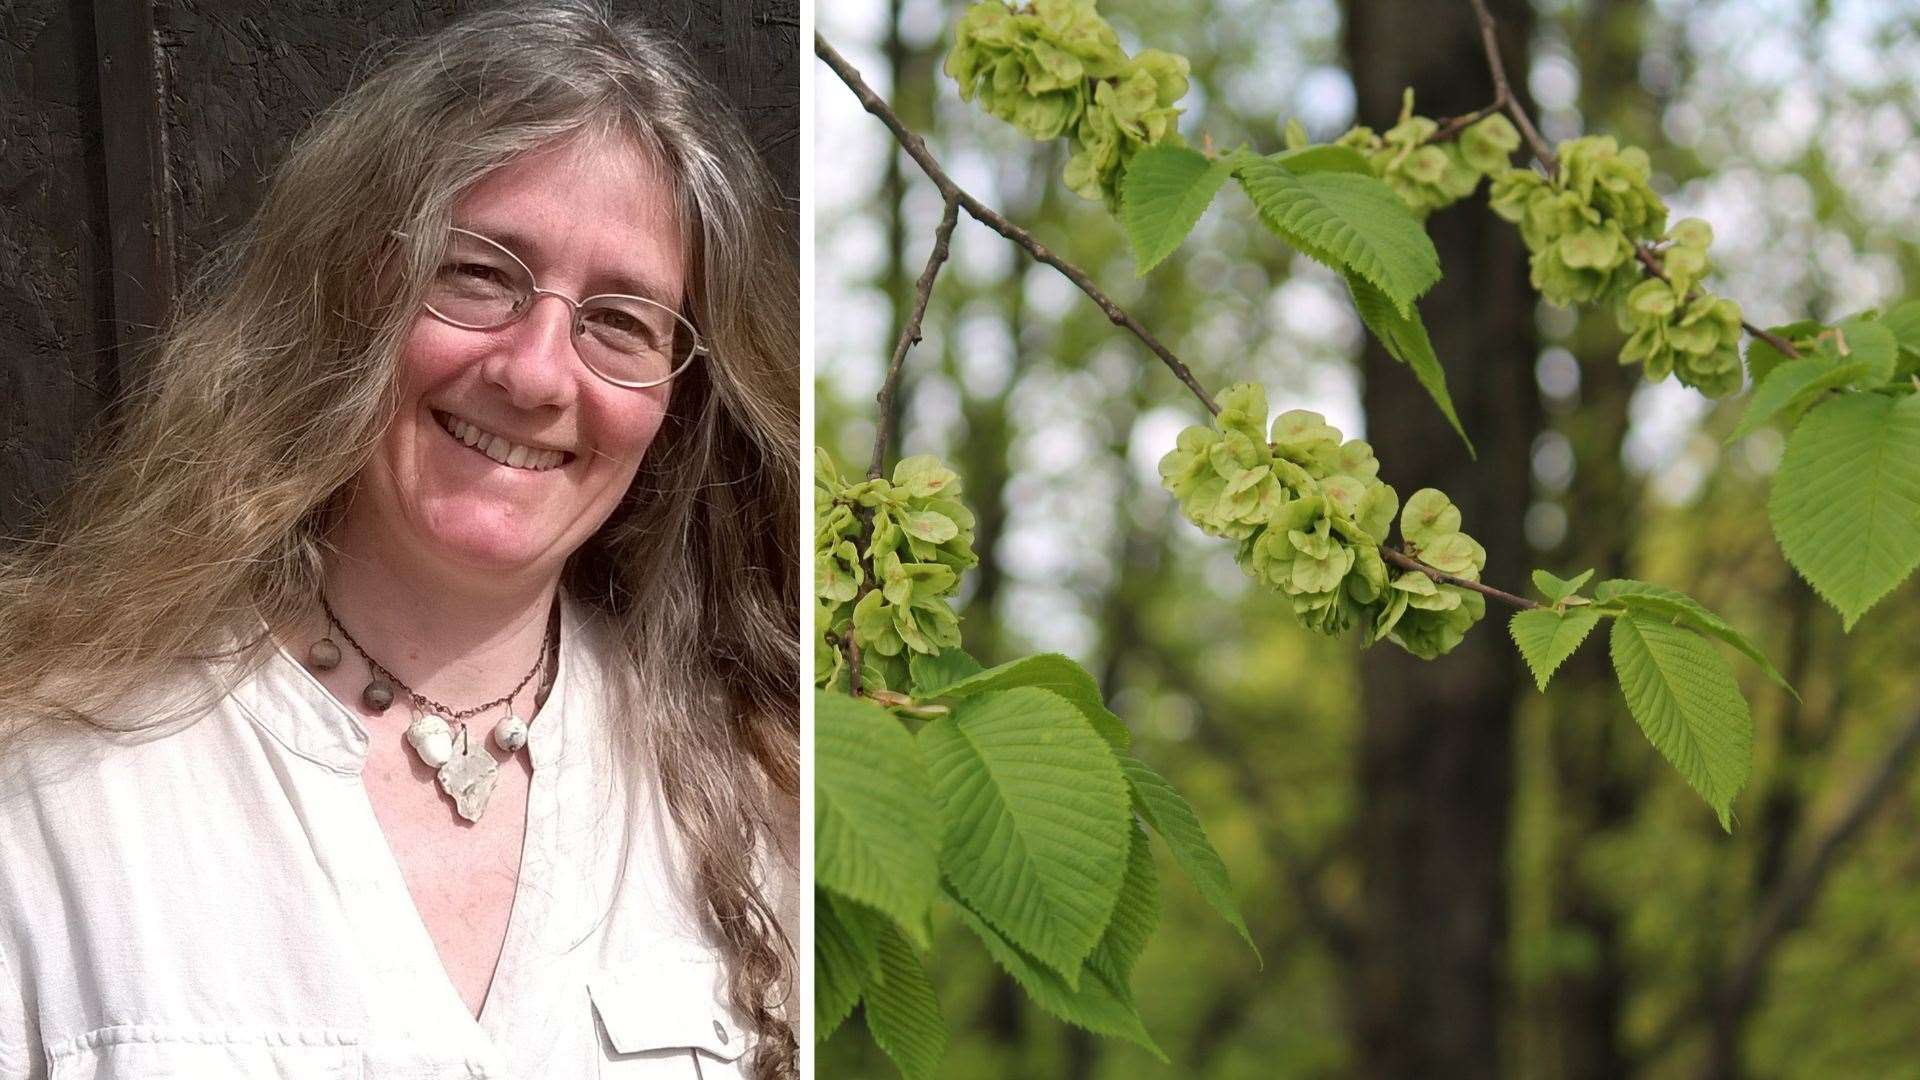 Dr Mandy Haggith is raising awareness of Assynt's endangered wych elm trees.